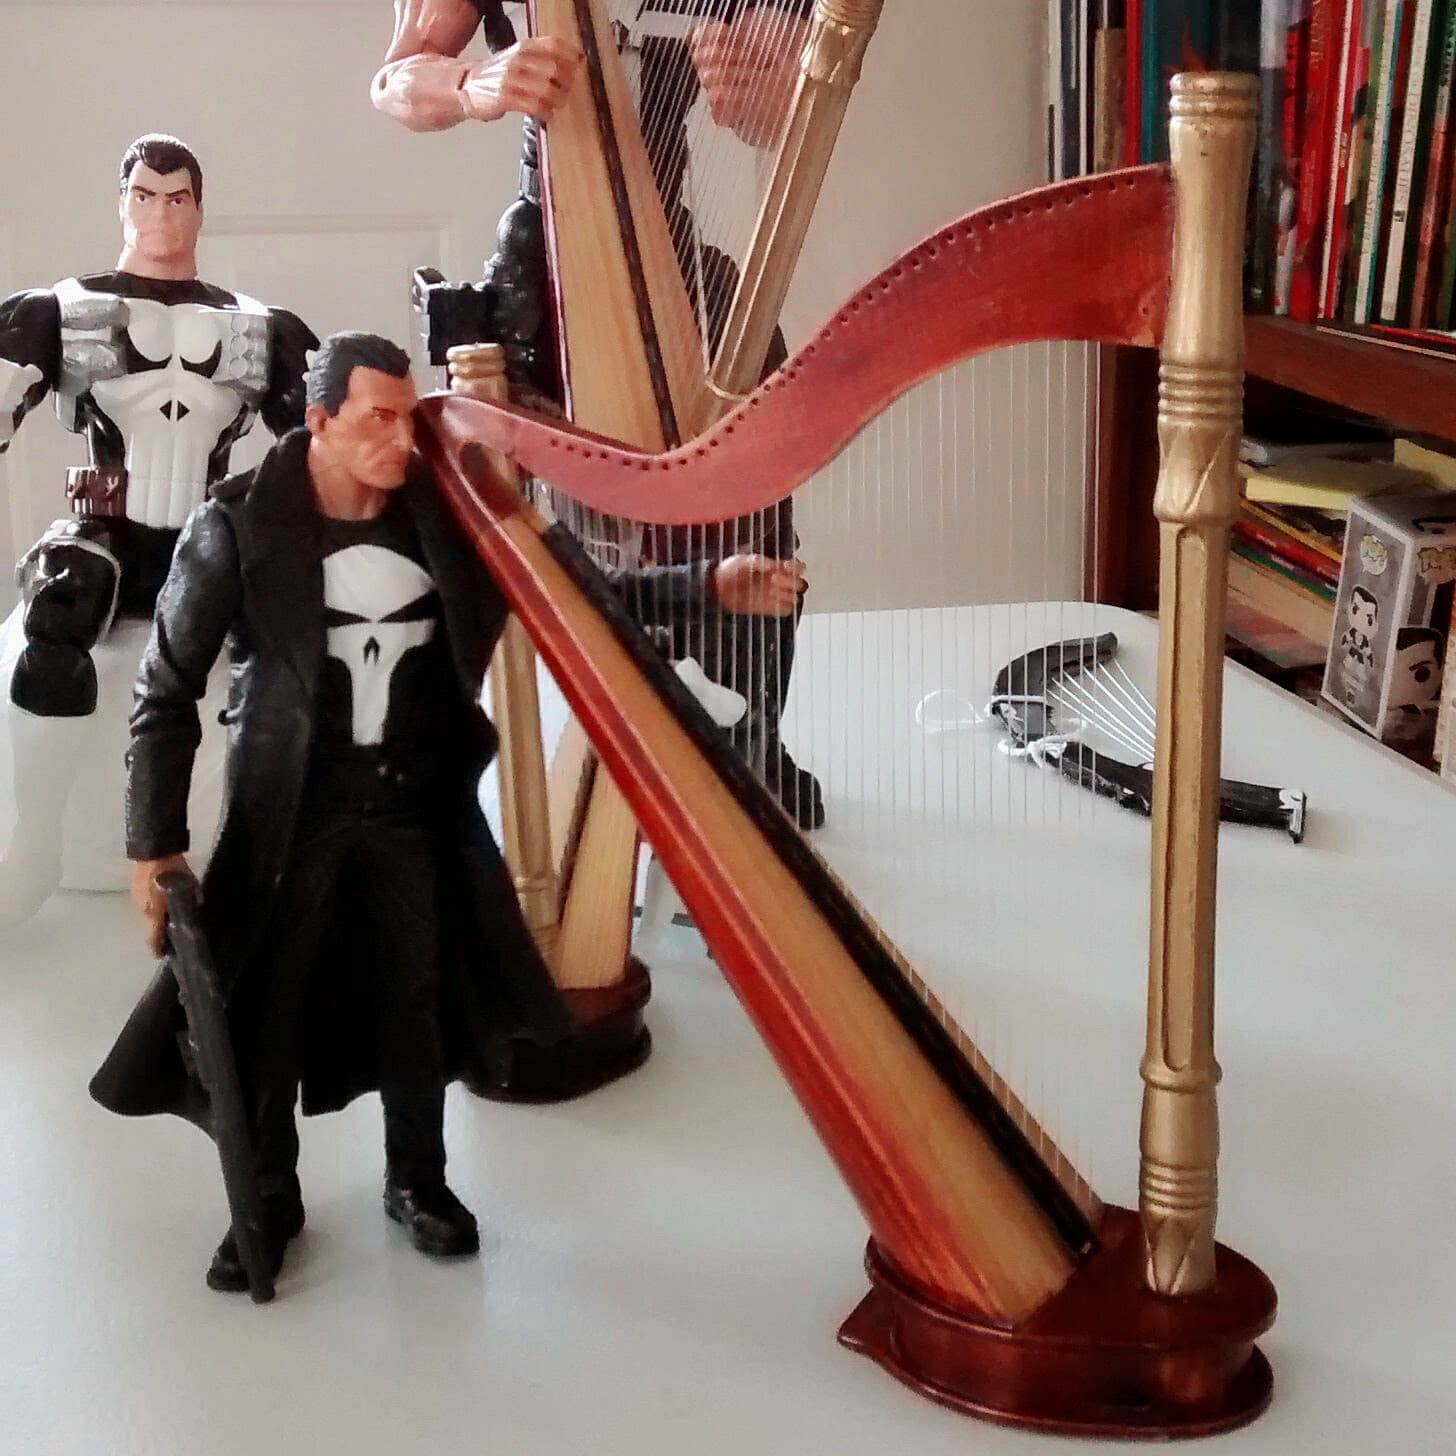 Look who just joined The Punisher Harp Ensemble.